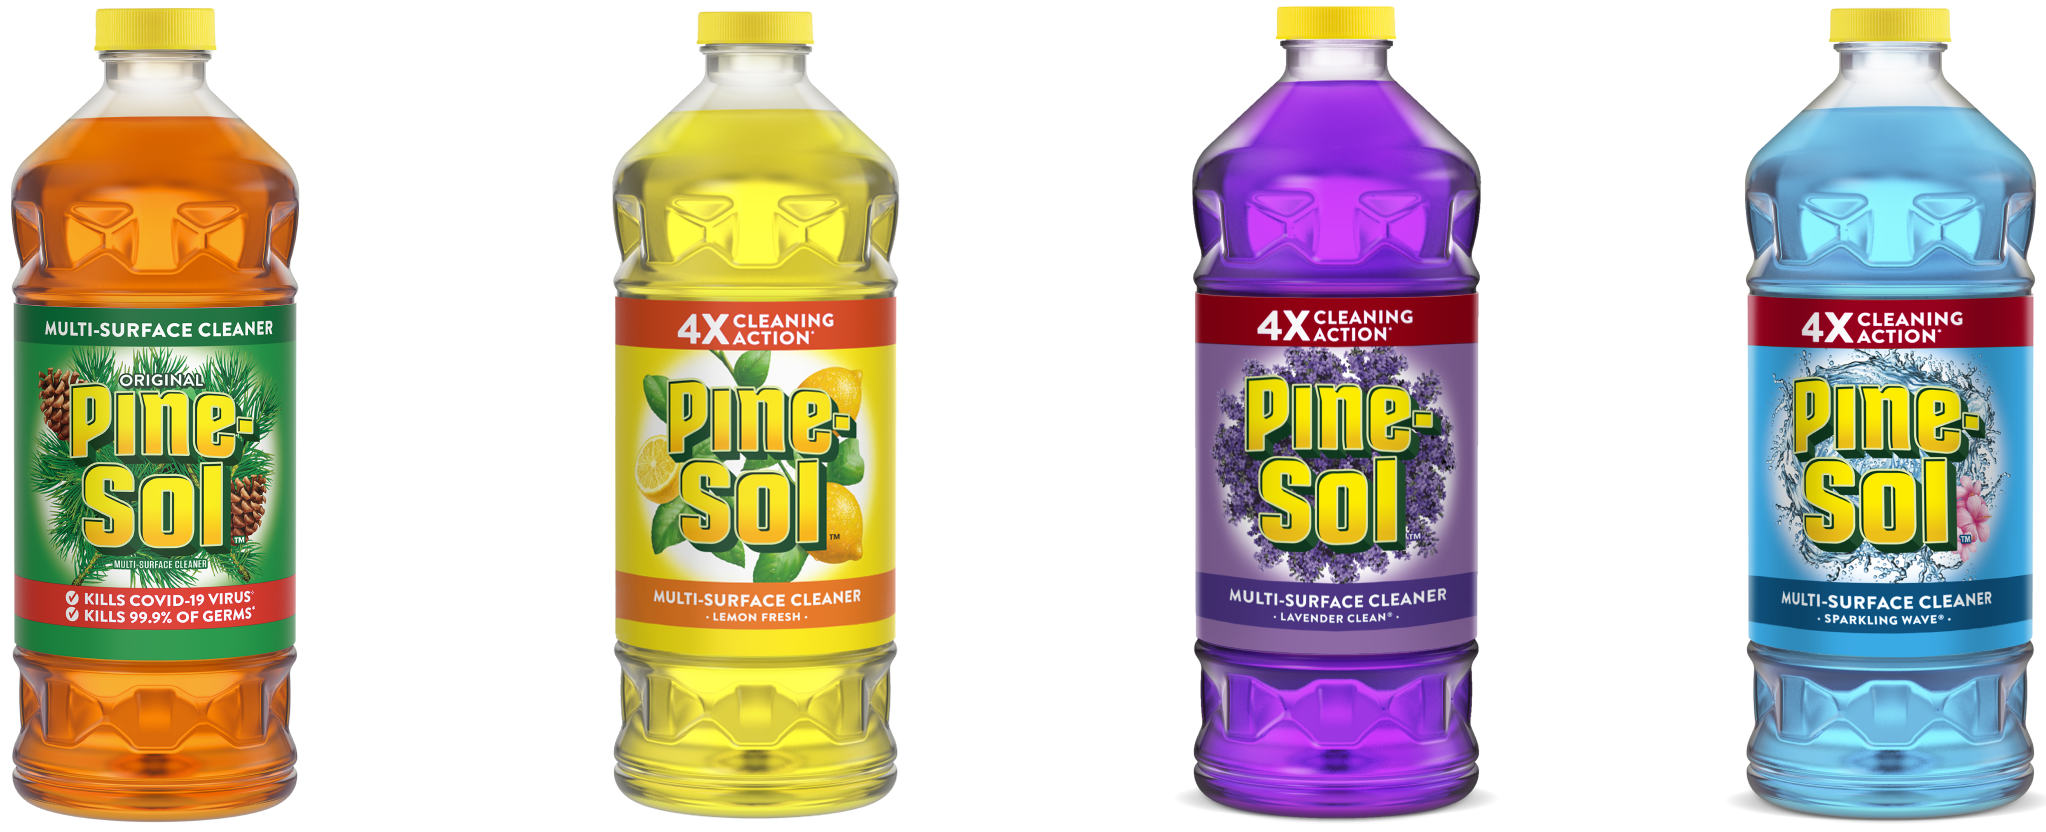 All Pine-Sol Product Bottles